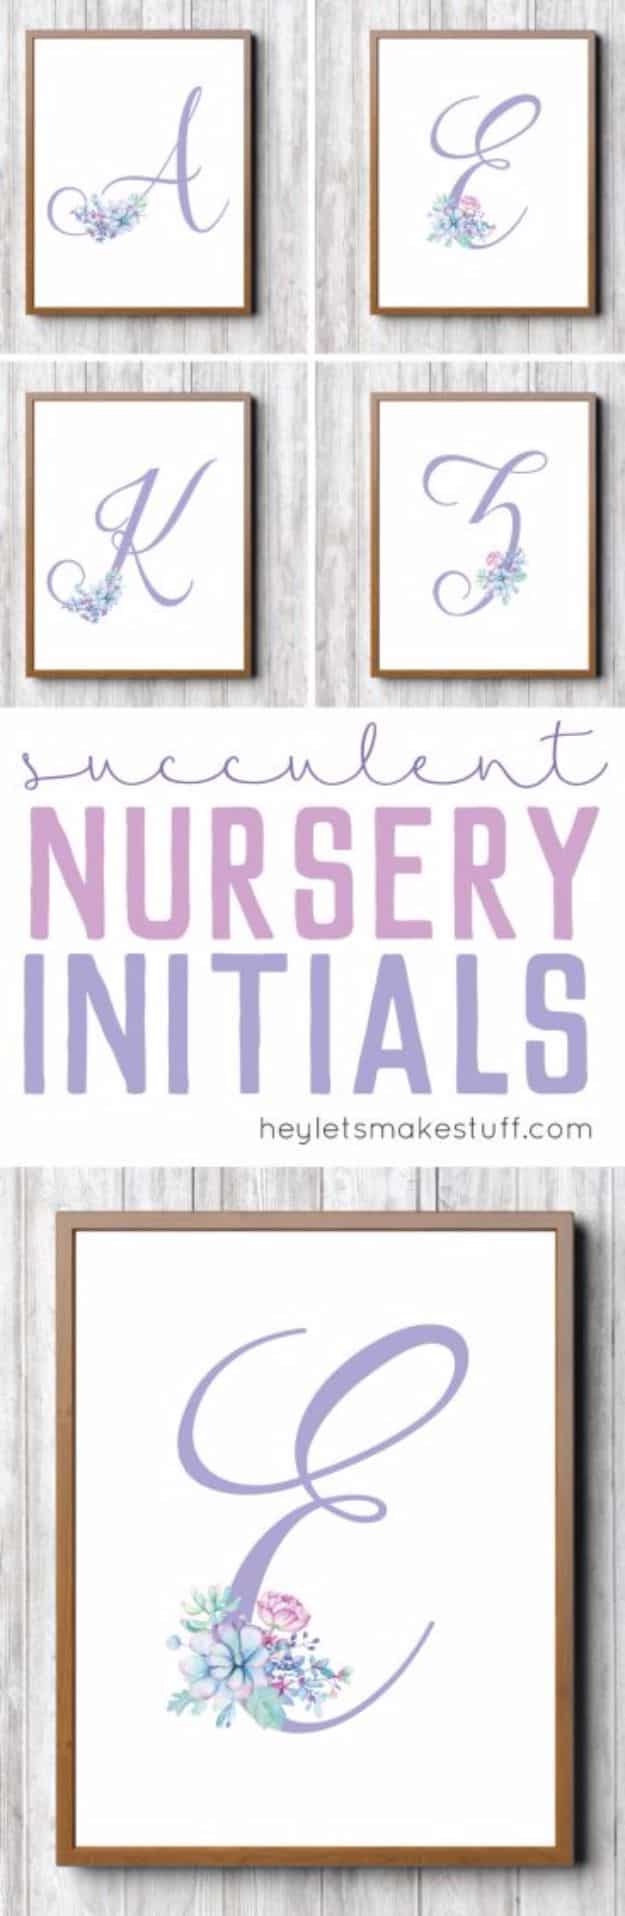 Best Free Printables for Crafts - Free Printable Purple Succulent Nursery Initials - Quotes, Templates, Paper Projects and Cards, DIY Gifts Cards, Stickers and Wall Art You Can Print At Home - Use These Fun Do It Yourself Template and Craft Ideas 